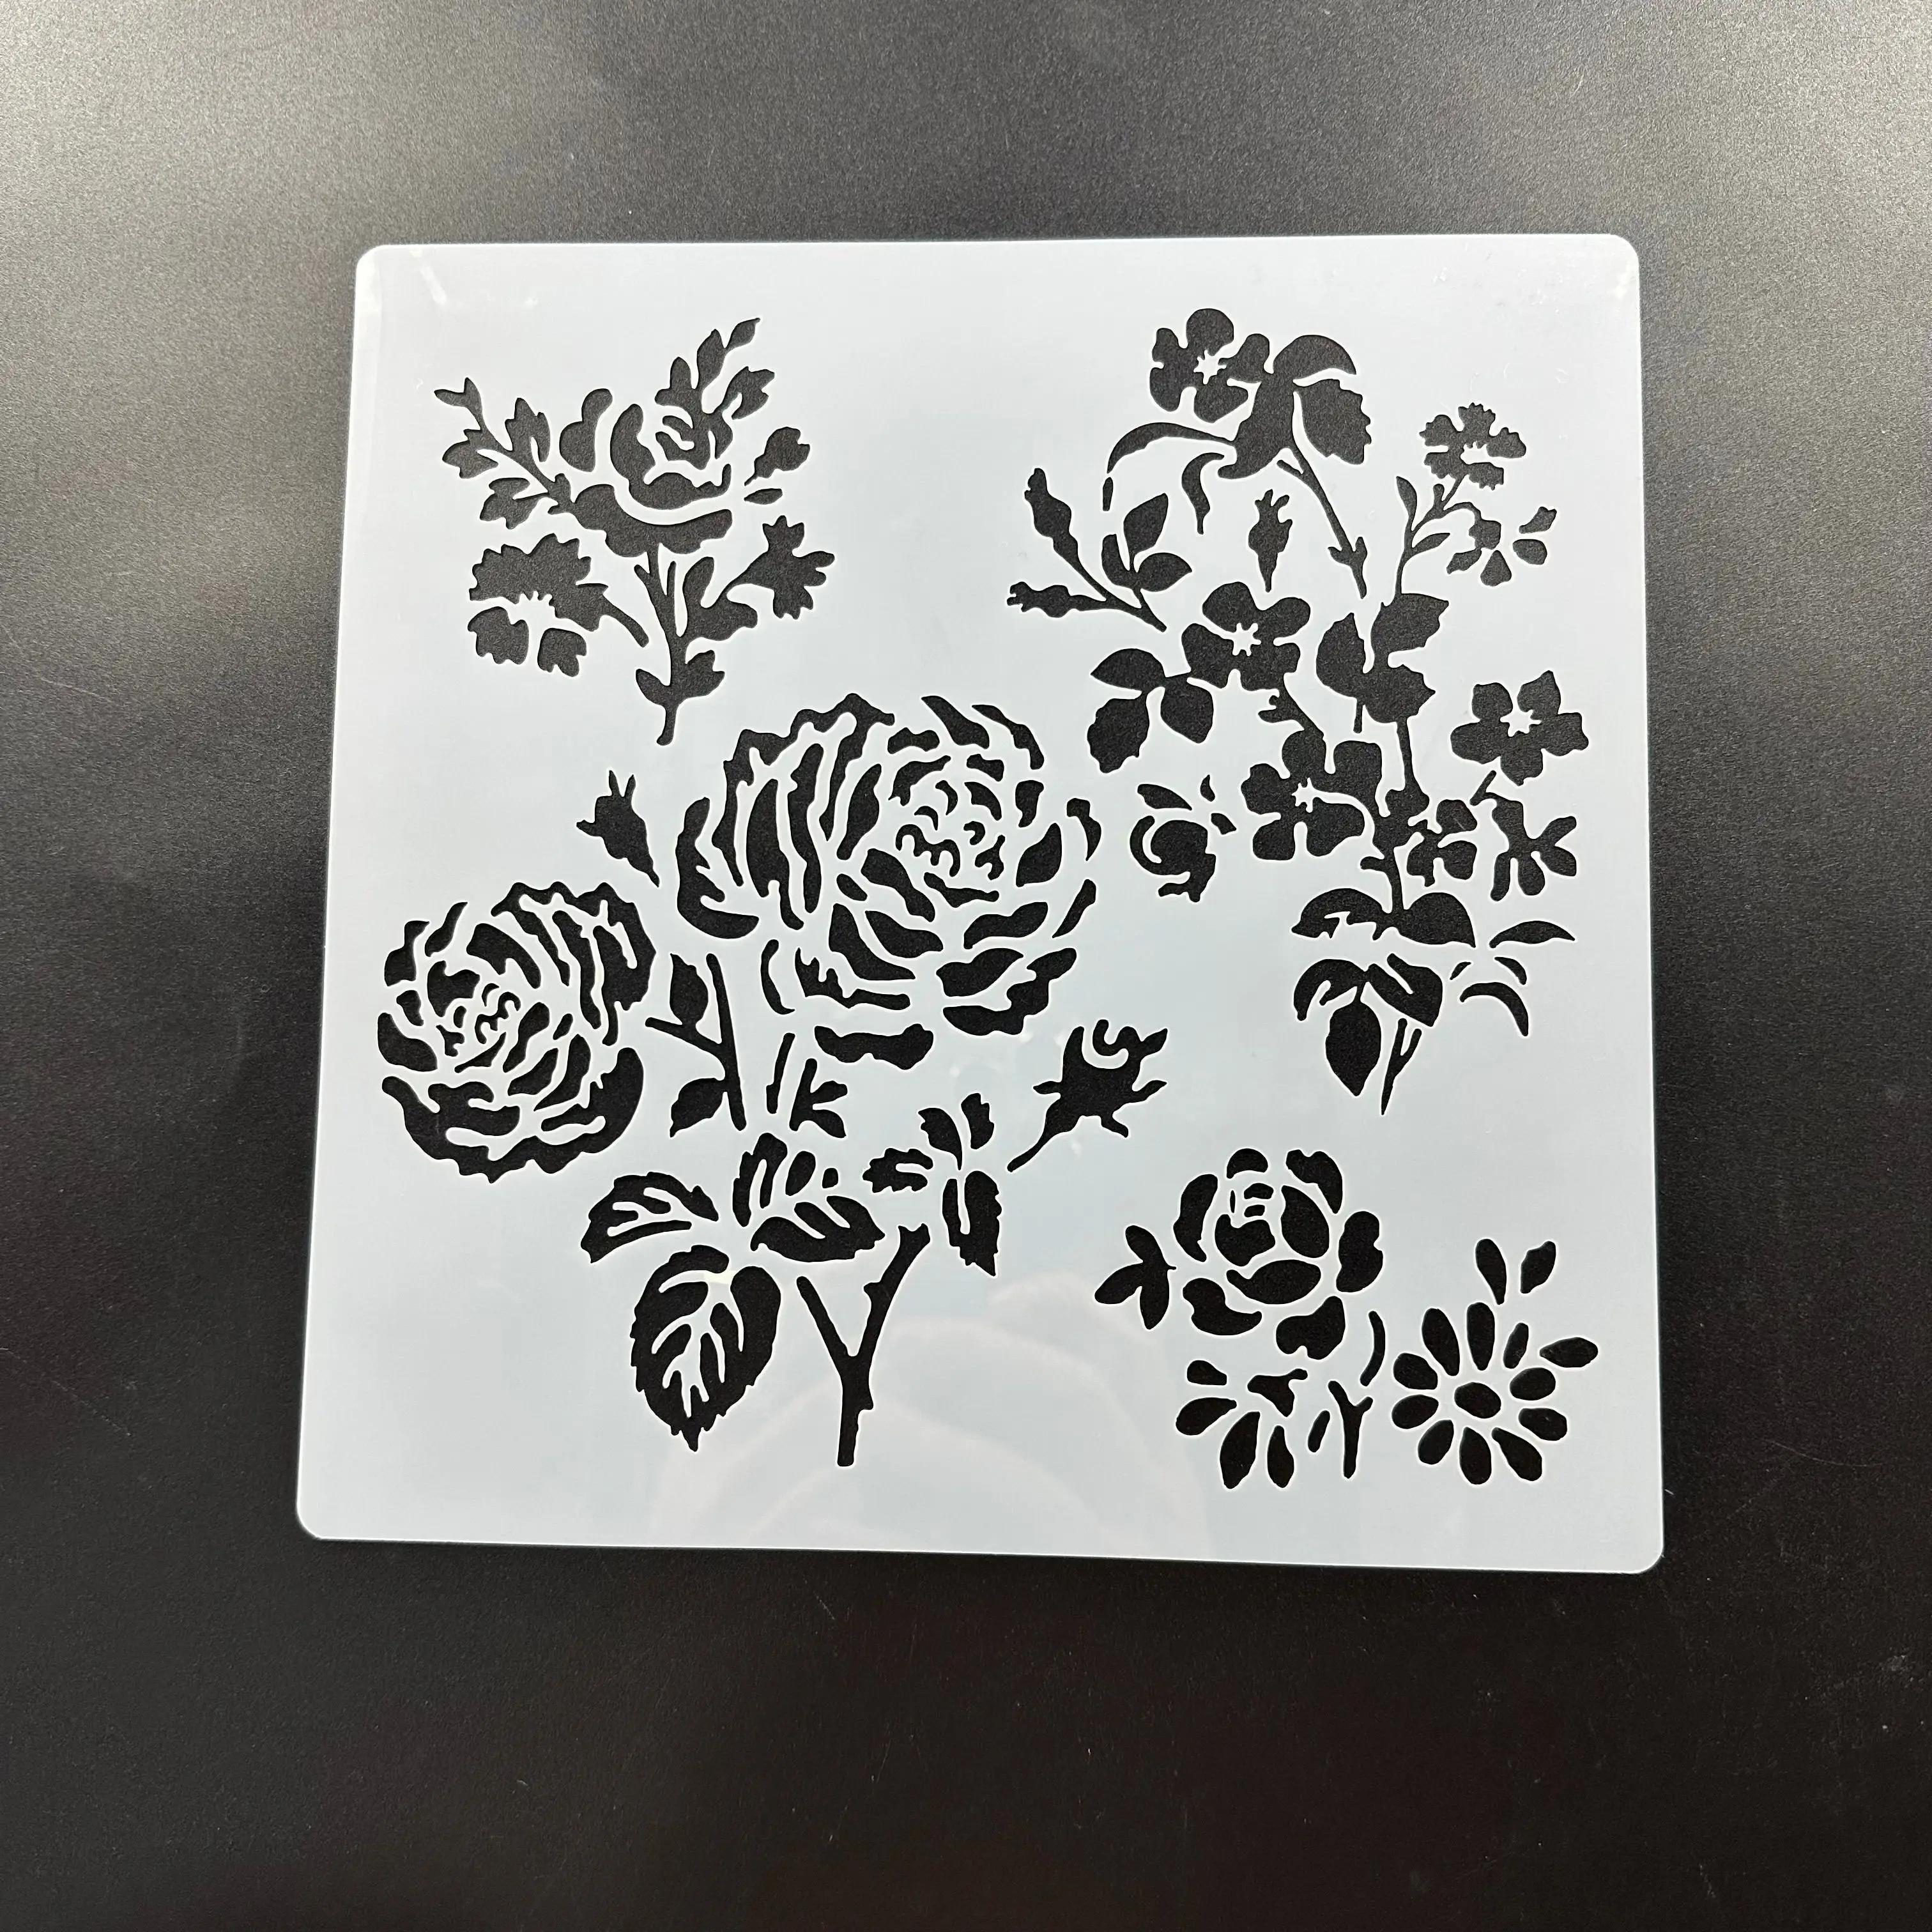 20 *20 cm size DIY Rose craft mandala mold for painting stencils stamped photo album embossed paper card on wood, fa